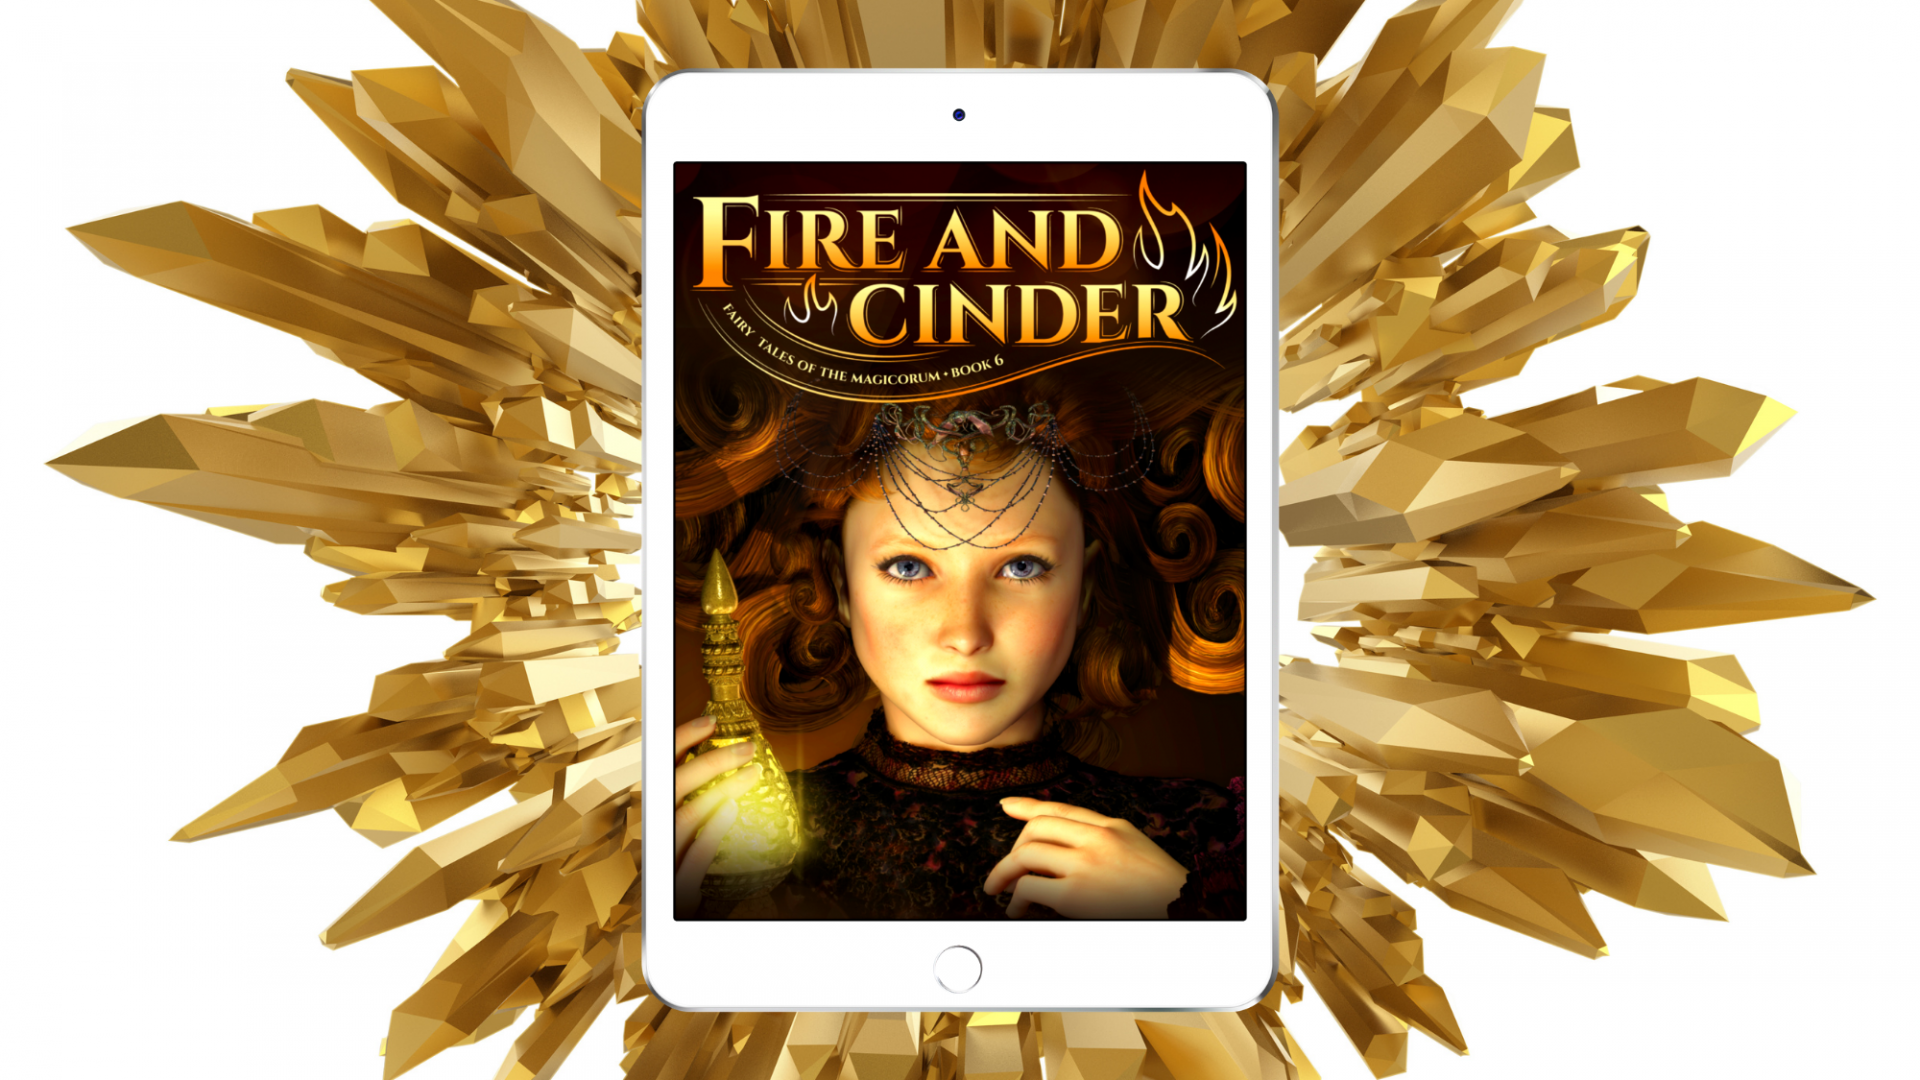 Best Quotes From The Book: FIRE AND CINDER